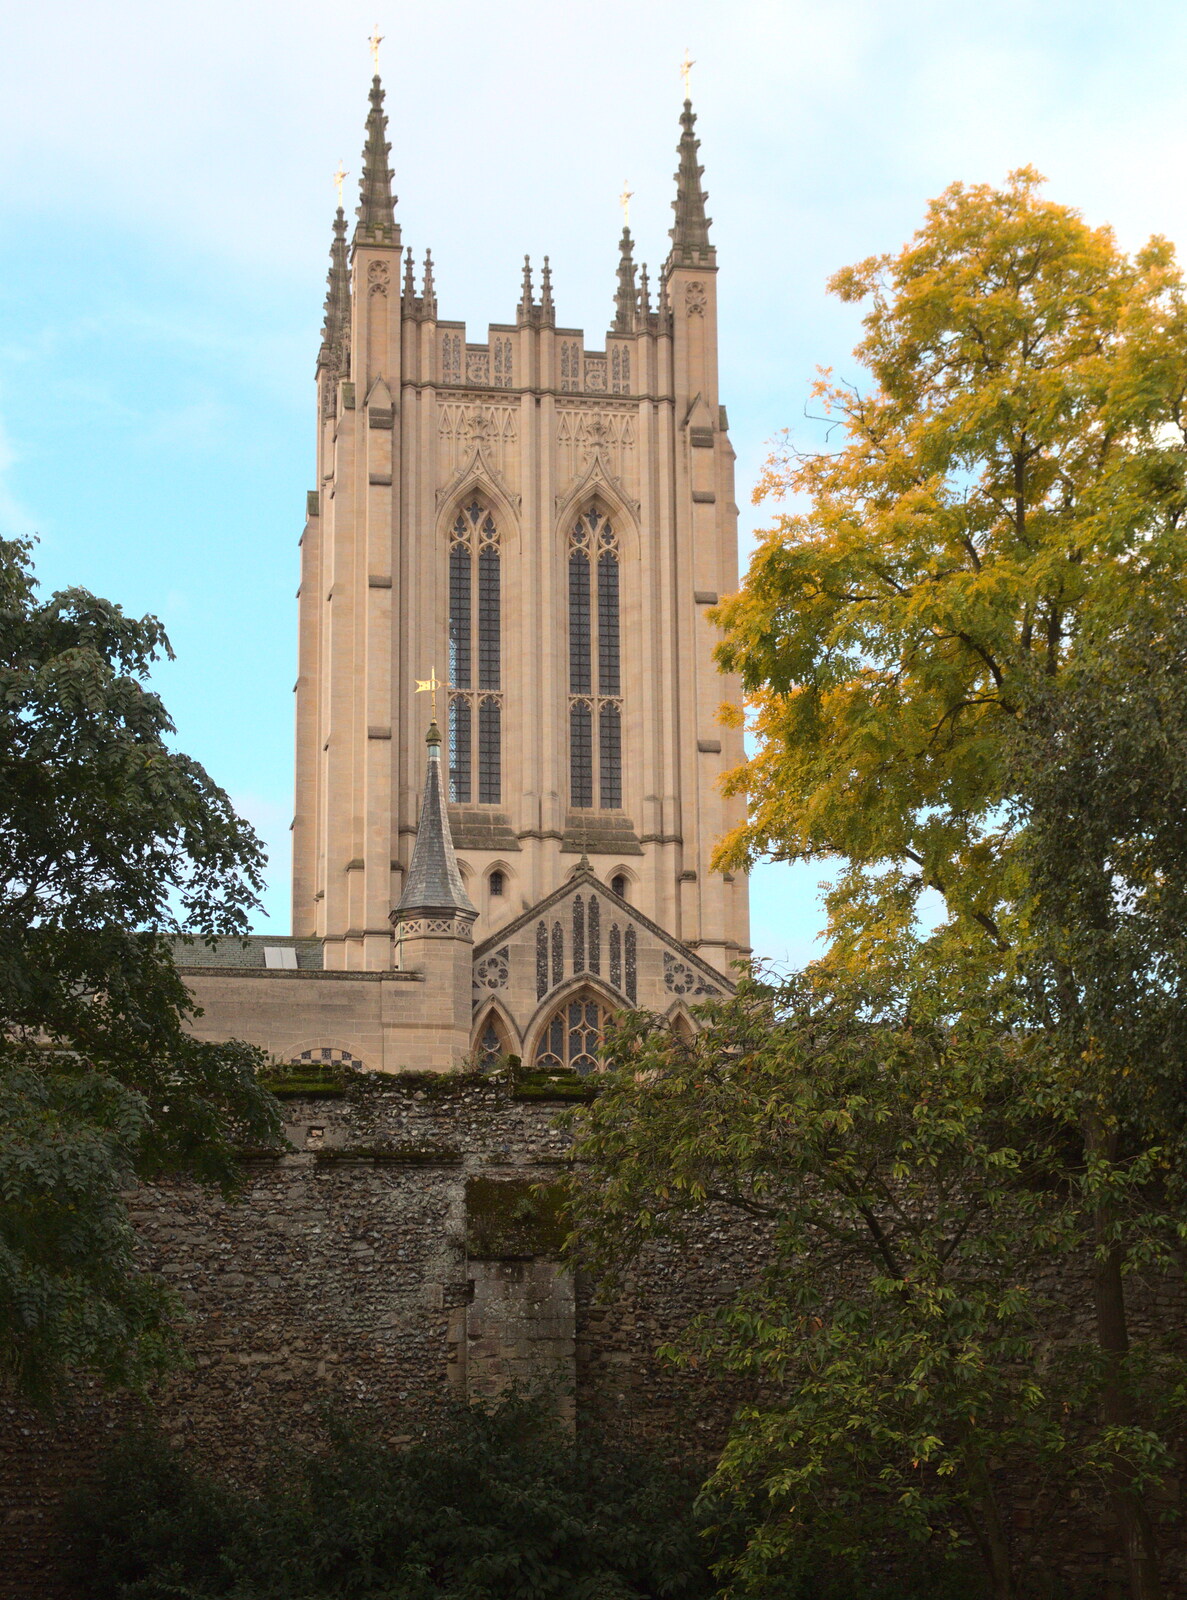 The tower of Bury St. Edmunds' Cathedral from Ploughing and Pizza, Thrandeston and Bury St. Edmunds, Suffolk - 17th September 2017